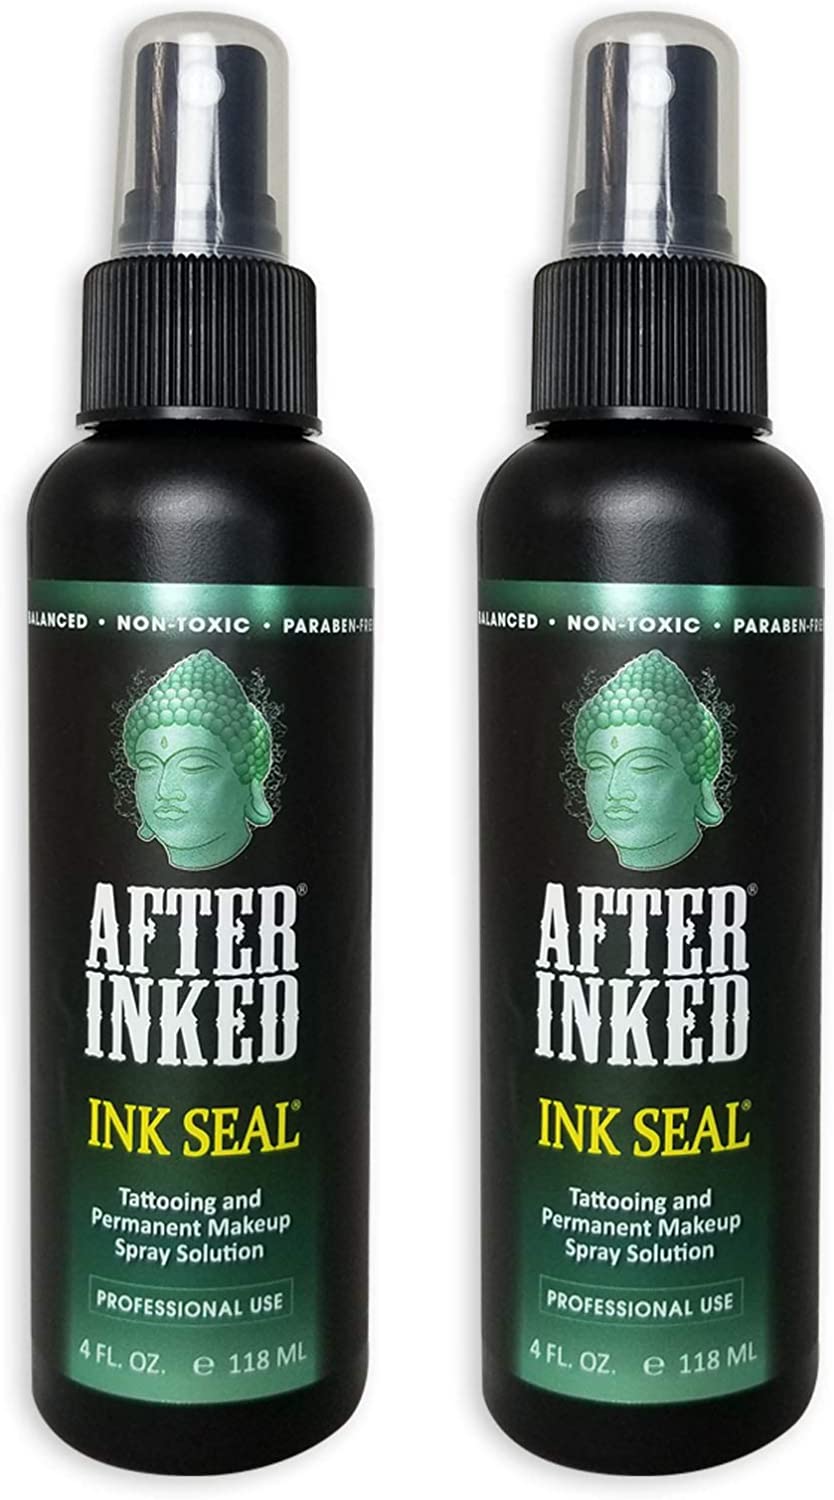 After Inked Ink Seal Tattoo Spray 4 oz side by side